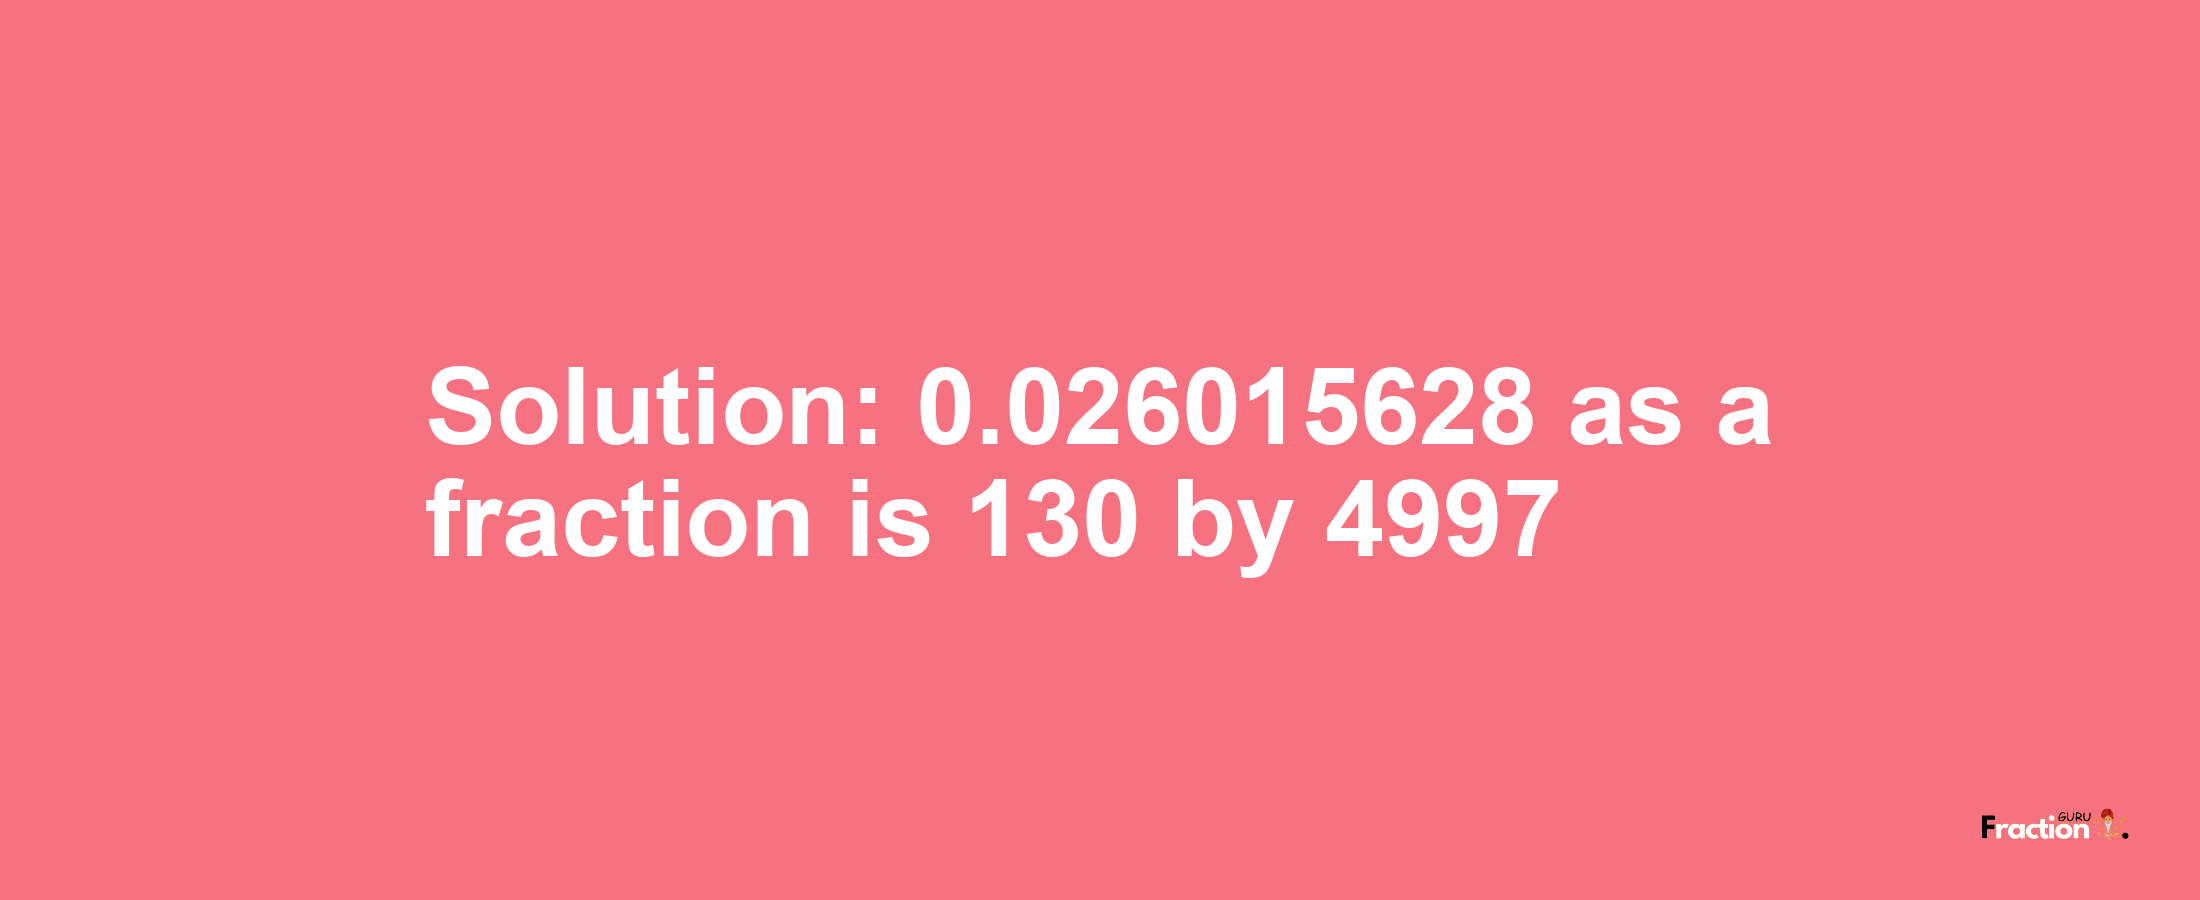 Solution:0.026015628 as a fraction is 130/4997